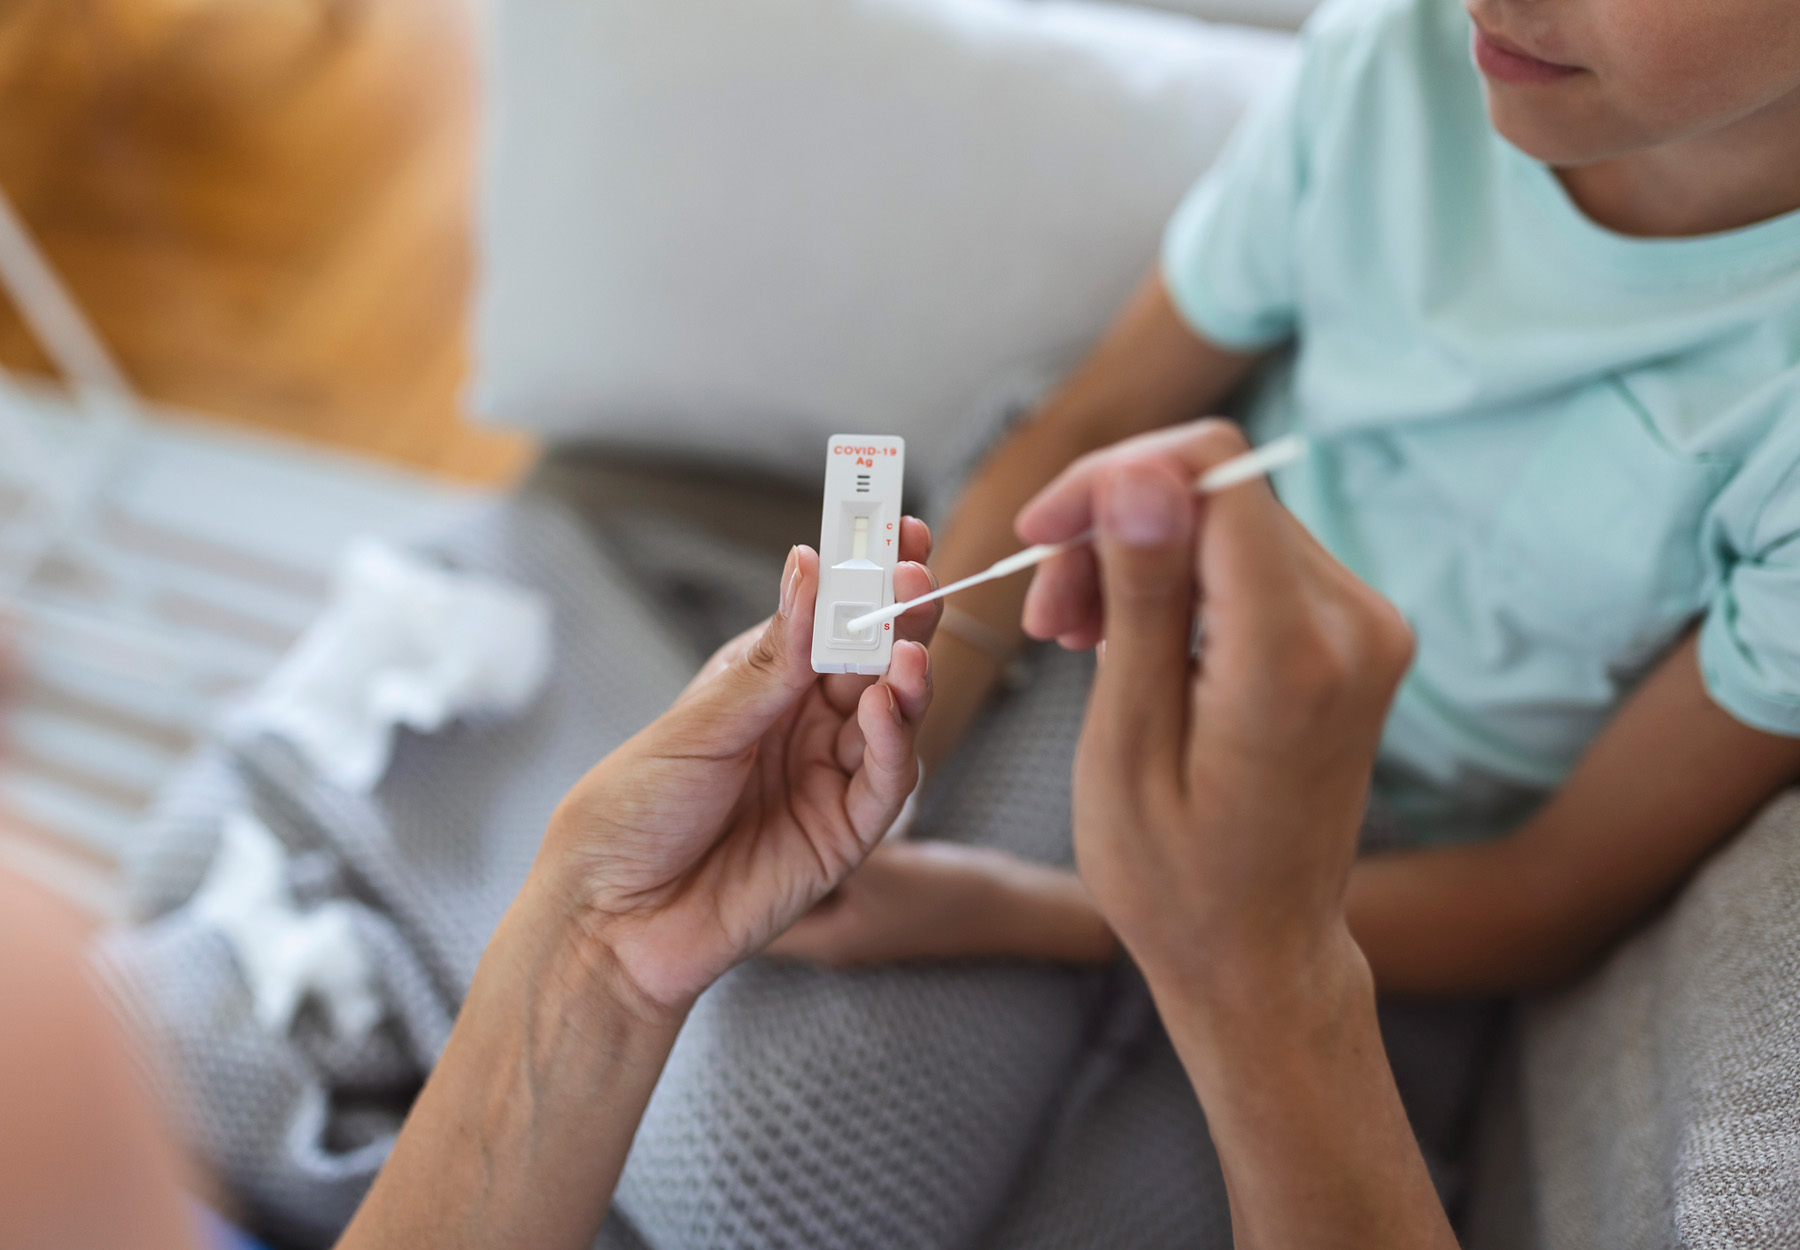 Closeup of mother performing at-home COVID-19 antigen test for her daughter. The mother is holding the swab and test cartridge while the daughter sits in the background. Stock photo.